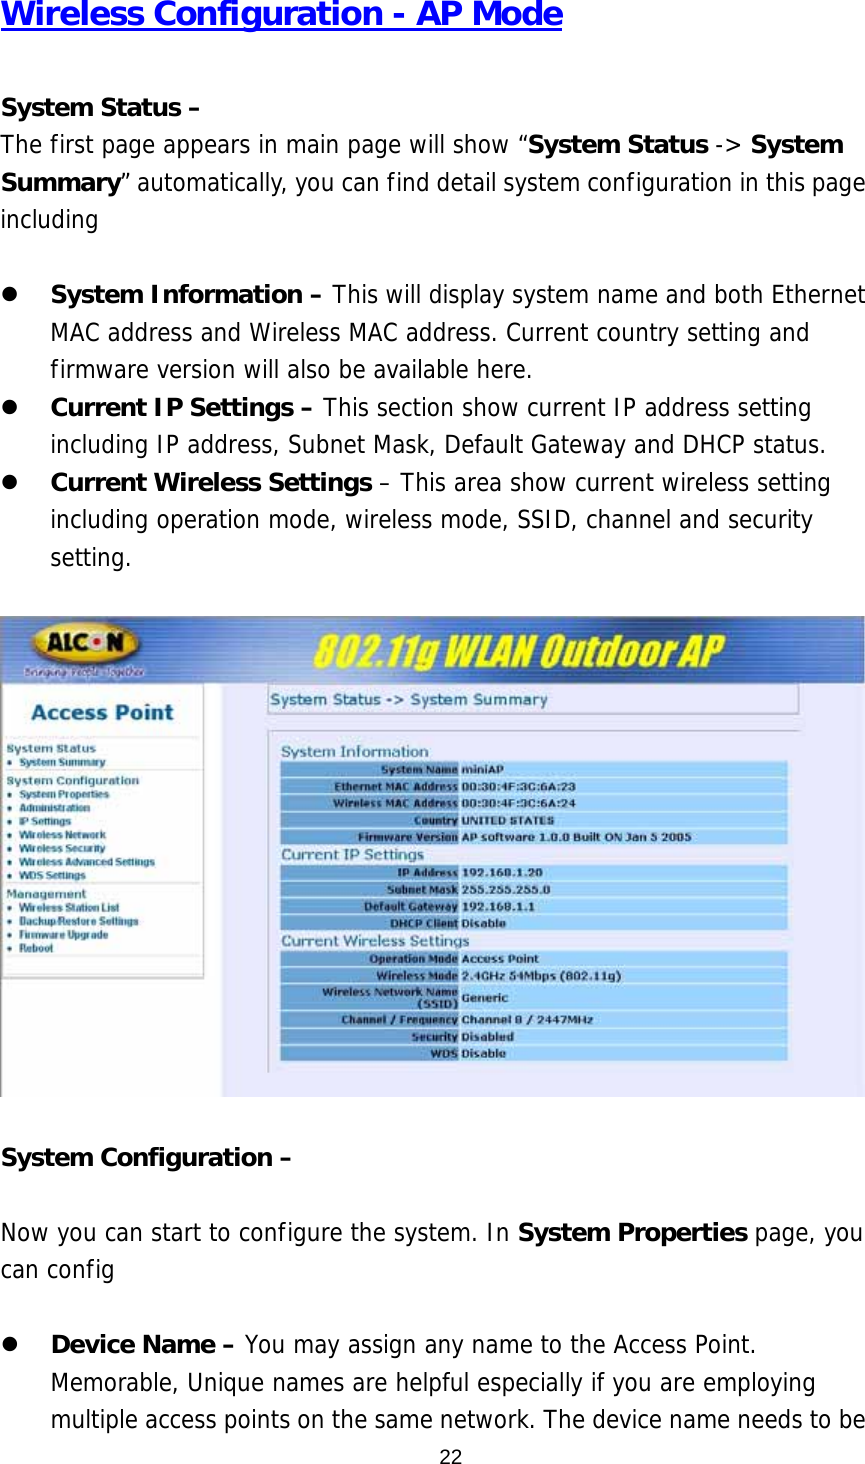 Wireless Configuration - AP Mode  System Status –   The first page appears in main page will show “System Status -&gt; System Summary” automatically, you can find detail system configuration in this page including   z System Information – This will display system name and both Ethernet MAC address and Wireless MAC address. Current country setting and firmware version will also be available here. z Current IP Settings – This section show current IP address setting including IP address, Subnet Mask, Default Gateway and DHCP status. z Current Wireless Settings – This area show current wireless setting including operation mode, wireless mode, SSID, channel and security setting.     System Configuration –    Now you can start to configure the system. In System Properties page, you can config   z Device Name – You may assign any name to the Access Point. Memorable, Unique names are helpful especially if you are employing multiple access points on the same network. The device name needs to be  22